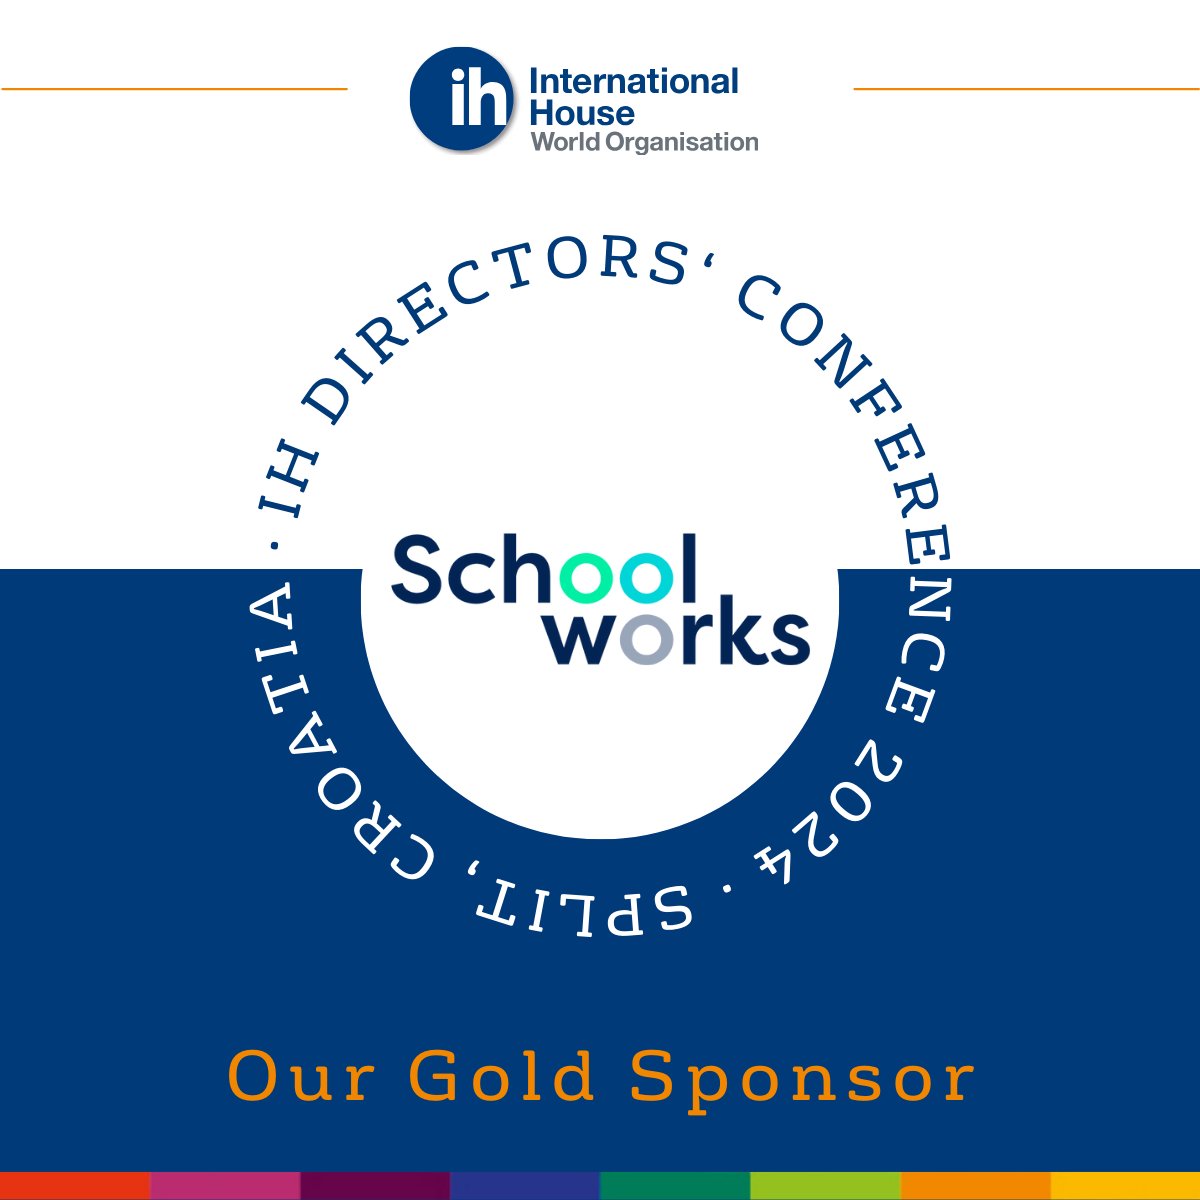 Thank you to our Gold Sponsors of the IH Directors’ Conference 2024, Schoolworks.

Learn more about their services here 👇 schoolworks.io 

#IHDirConf2024 #ihworld #InternationalHouse #IHNetwork #IHEvents